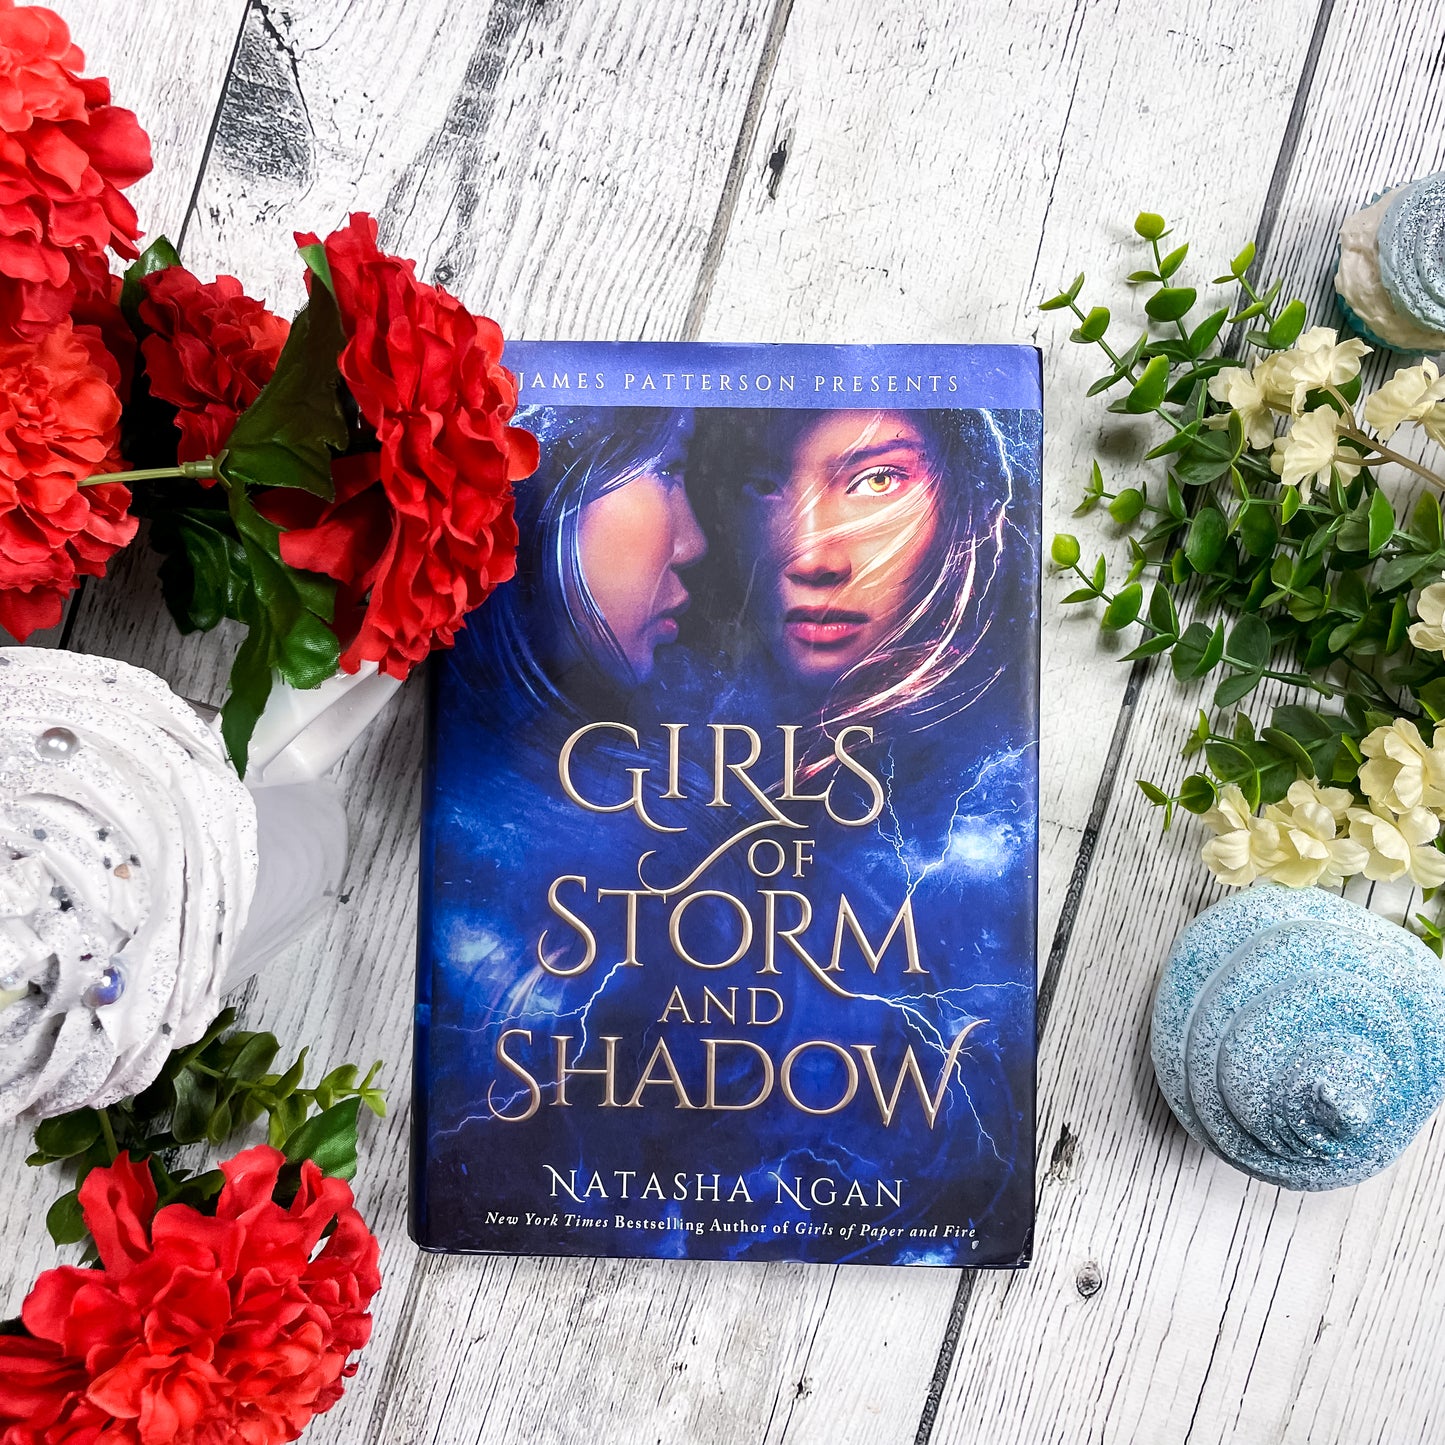 Girls of Storm and Shadow (Girls of Paper and Fire #2) by Natasha Ngan